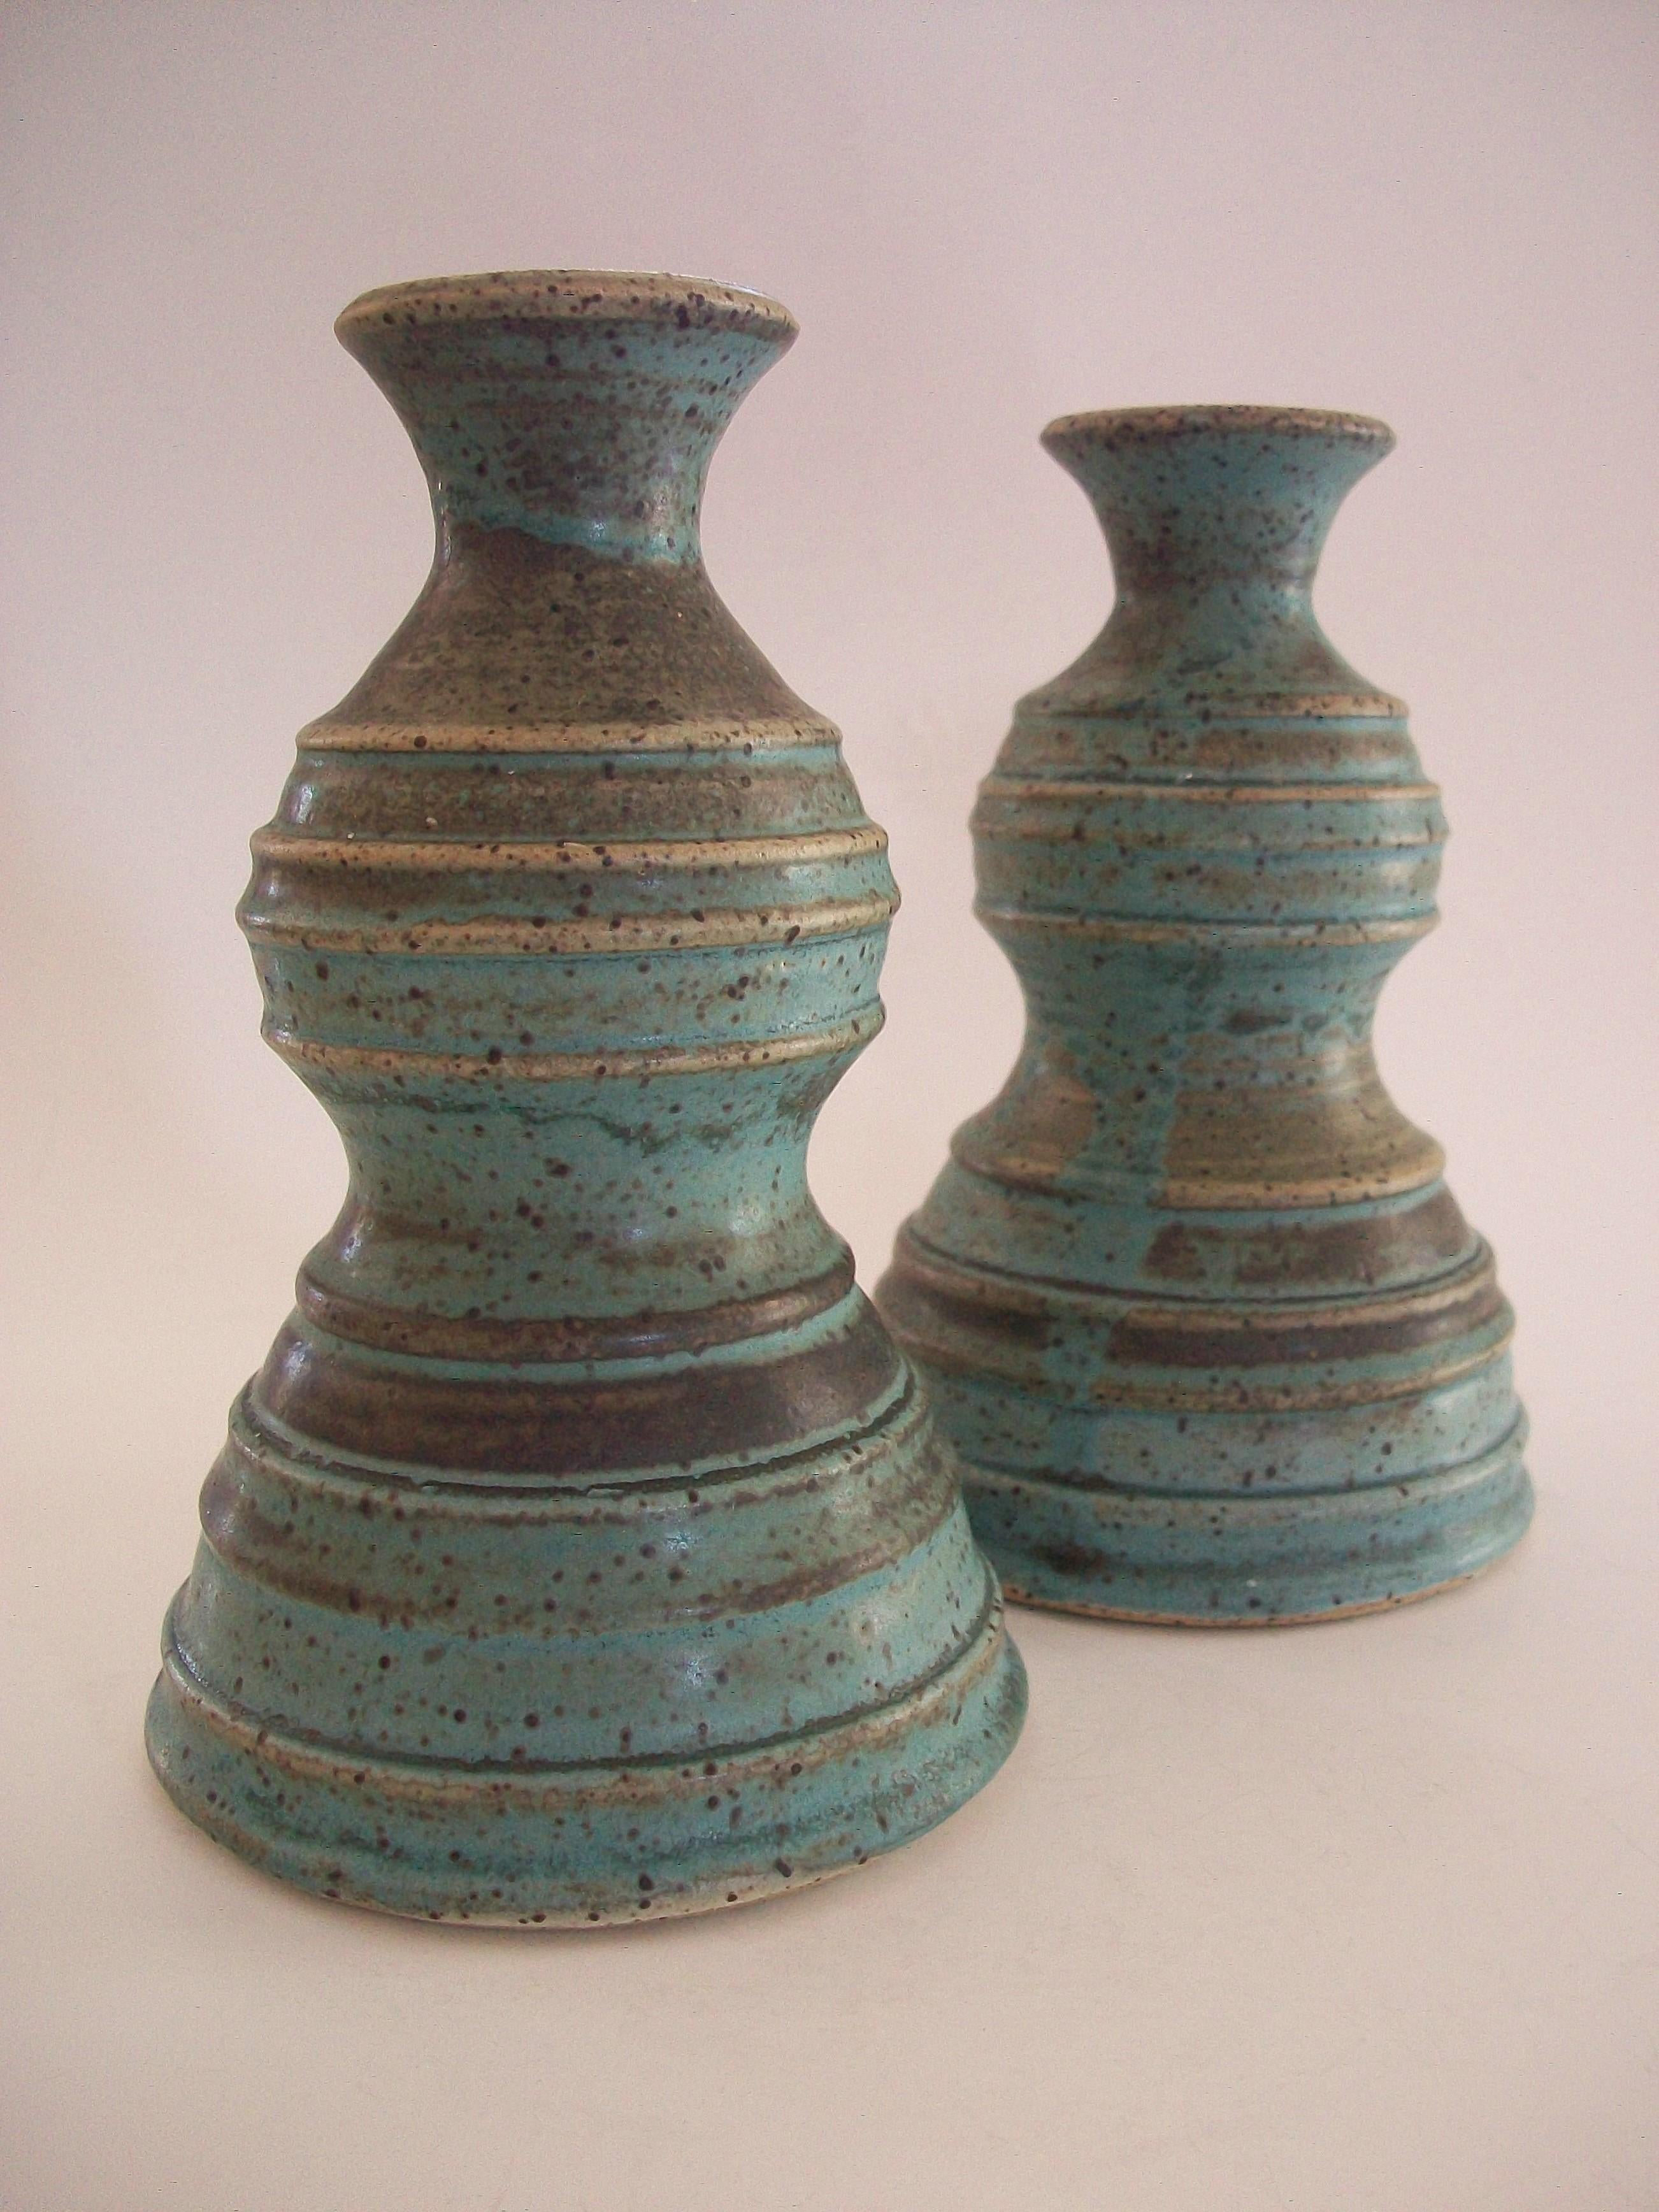 ALISON FENIAK - Mid Century studio pottery candle holders - intermingled matte turquoise and brown glazes - hand made / wheel thrown - each signed and dated on the base - Canada - circa 1956.

Excellent / mint vintage condition - no loss - no